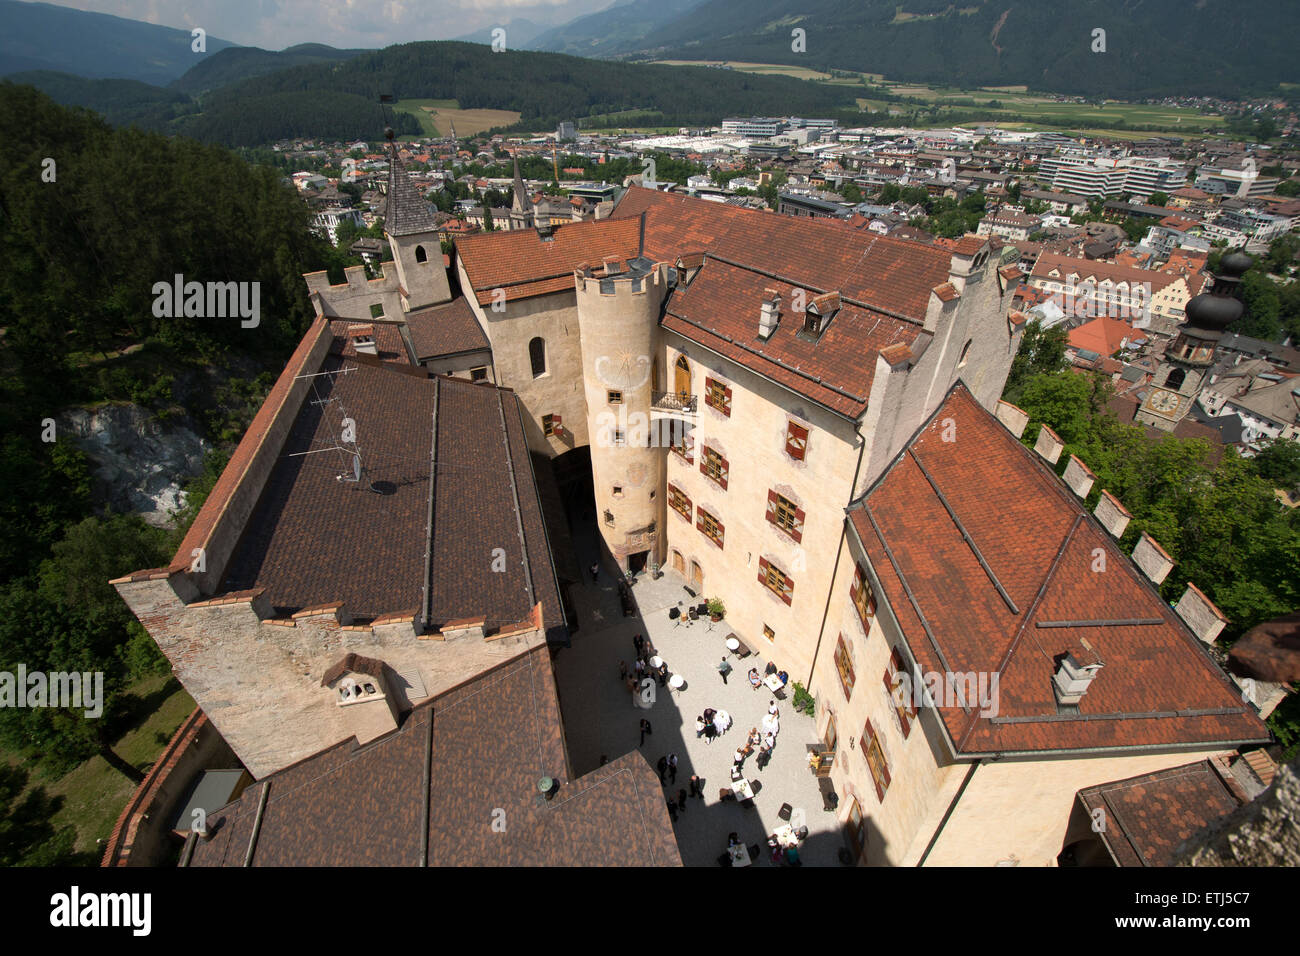 Brunico Castle, Messner Mountain Museum, MMM Ripa, Bruneck, Brunico, South Tyrol, Italy Stock Photo